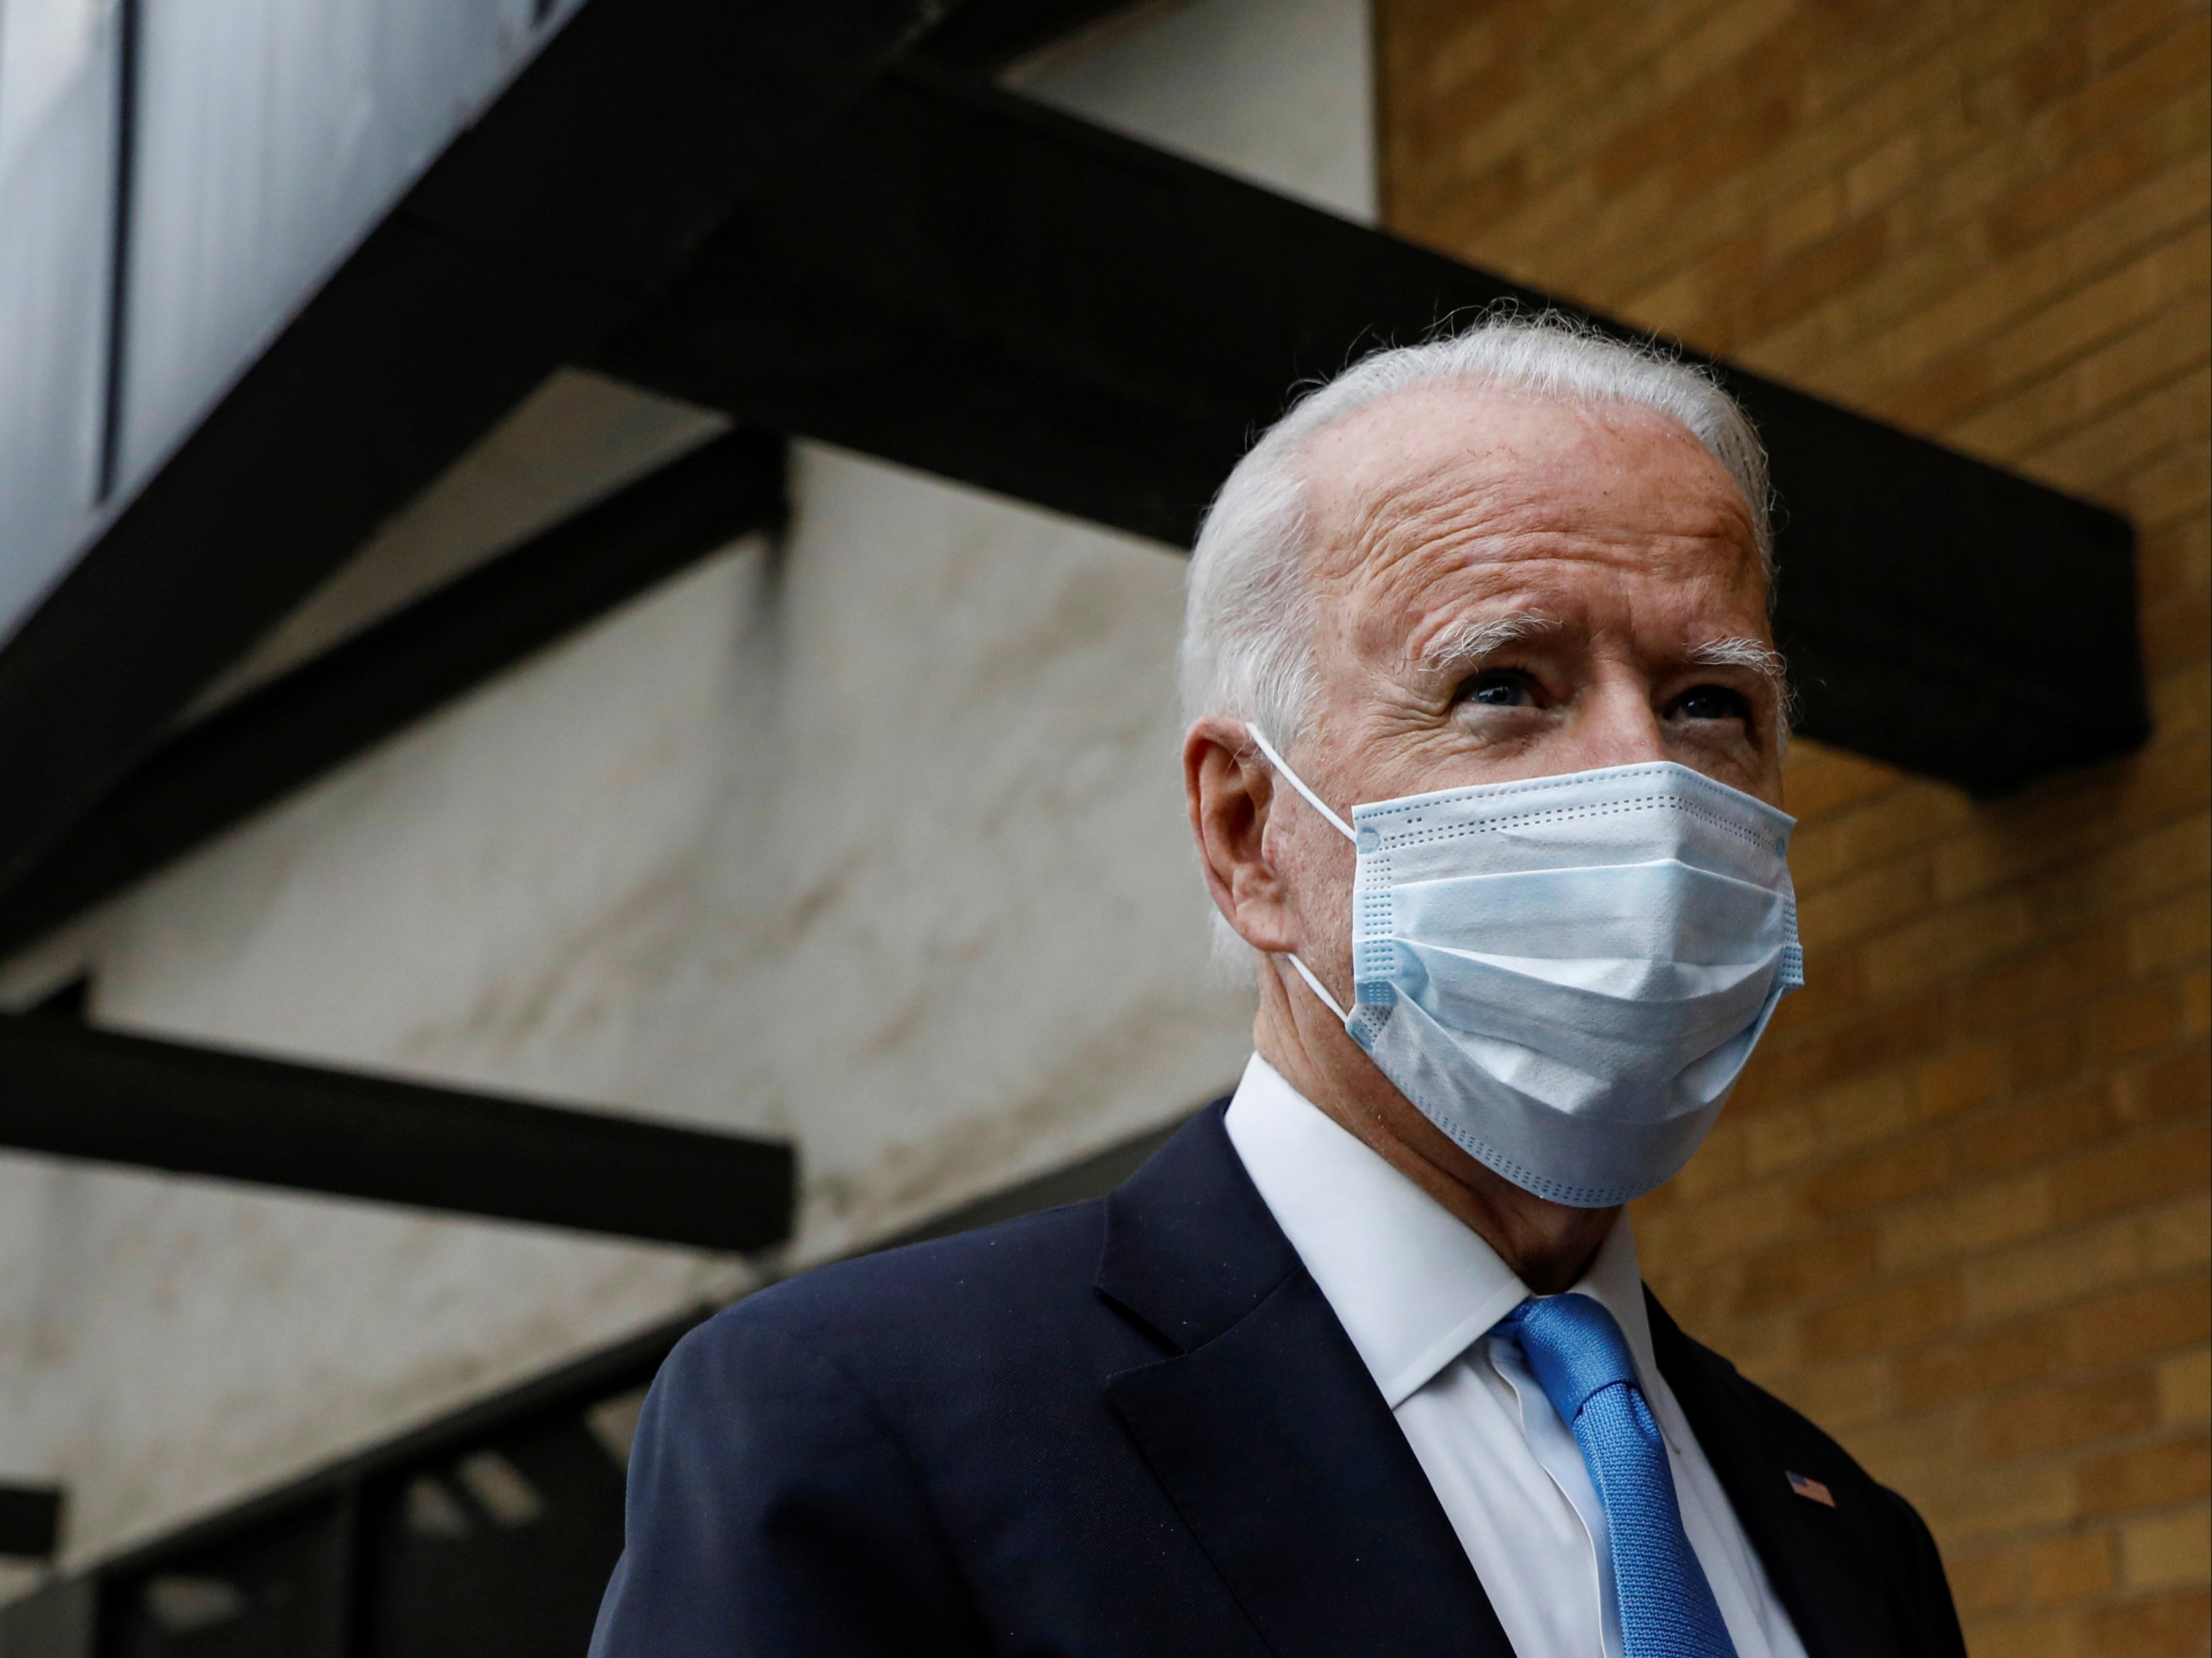 US Democratic presidential candidate and former Vice President Joe Biden stops to answer questions as he exits The Queen theatre in Wilmington, Delaware